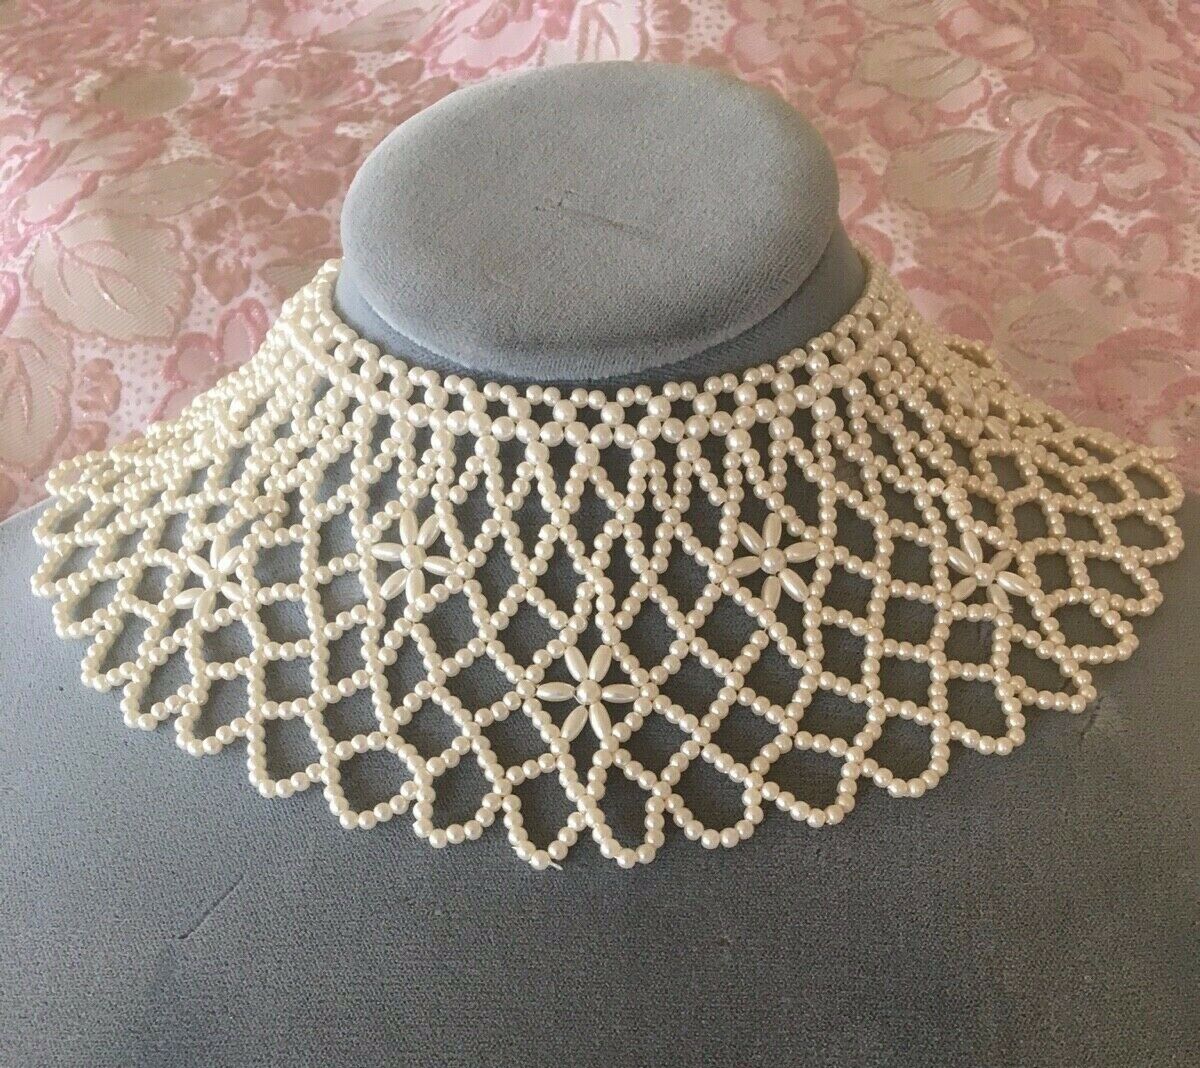 Vintage Antique Hand Crafted Faux Pearl Collar Necklace Ruth Bader Ginsburg Goth